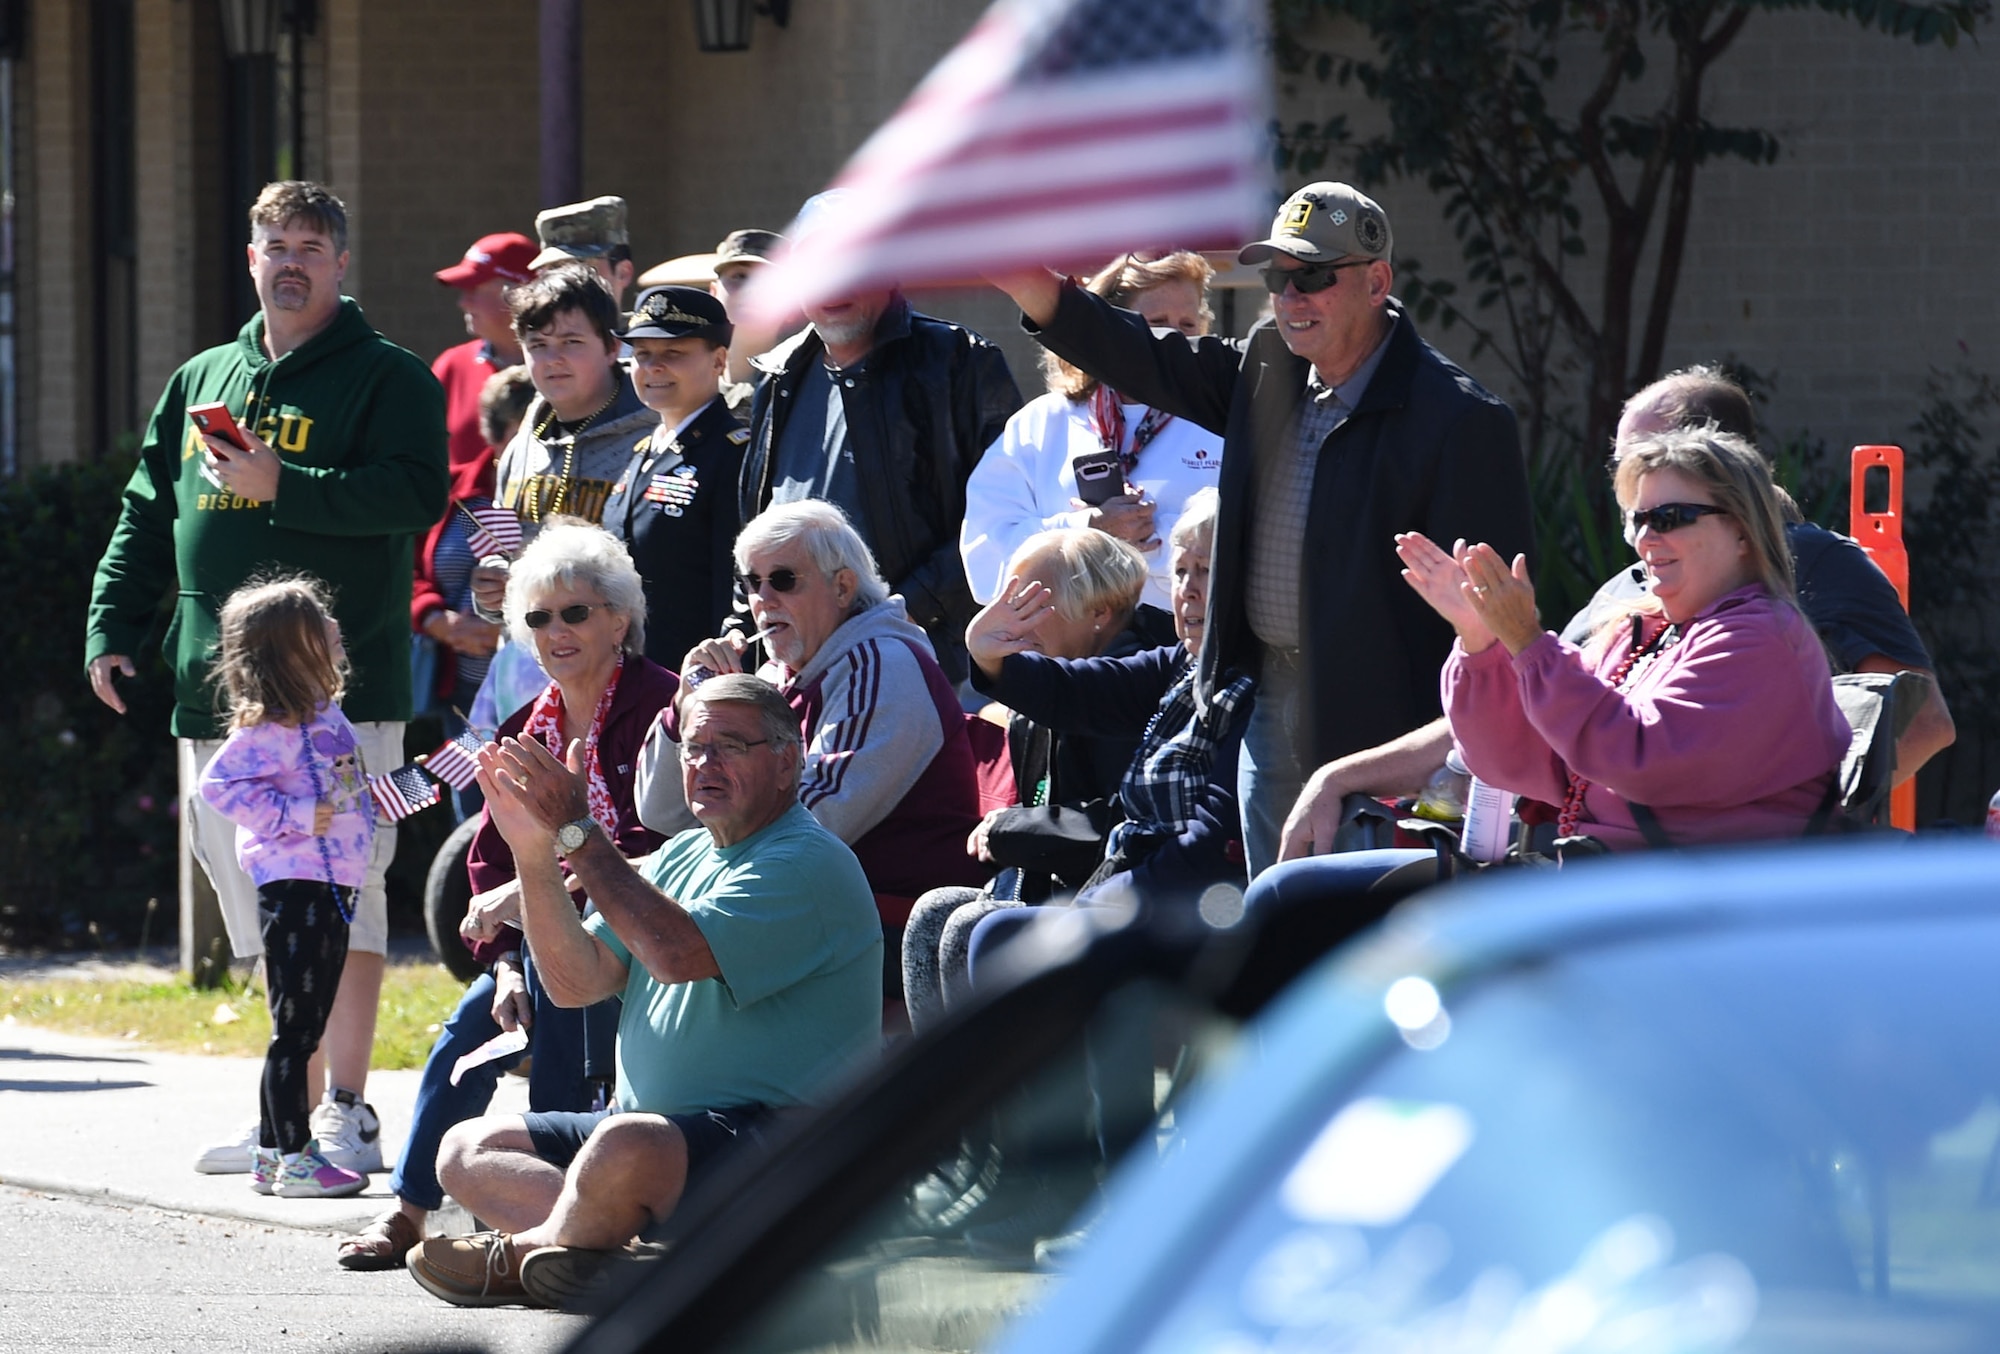 Gulf Coast residents attend the 21st Annual Gulf Coast Veterans Day Parade in Biloxi, Mississippi, Nov. 6, 2021. Keesler Air Force Base leadership, along with hundreds of Airmen, attended and participated in the parade in support of all veterans, past and present. More than 50 unique floats, marching bands and military units marched in the largest Veterans Day parade on the Gulf Coast. (U.S. Air Force photo by Kemberly Groue)